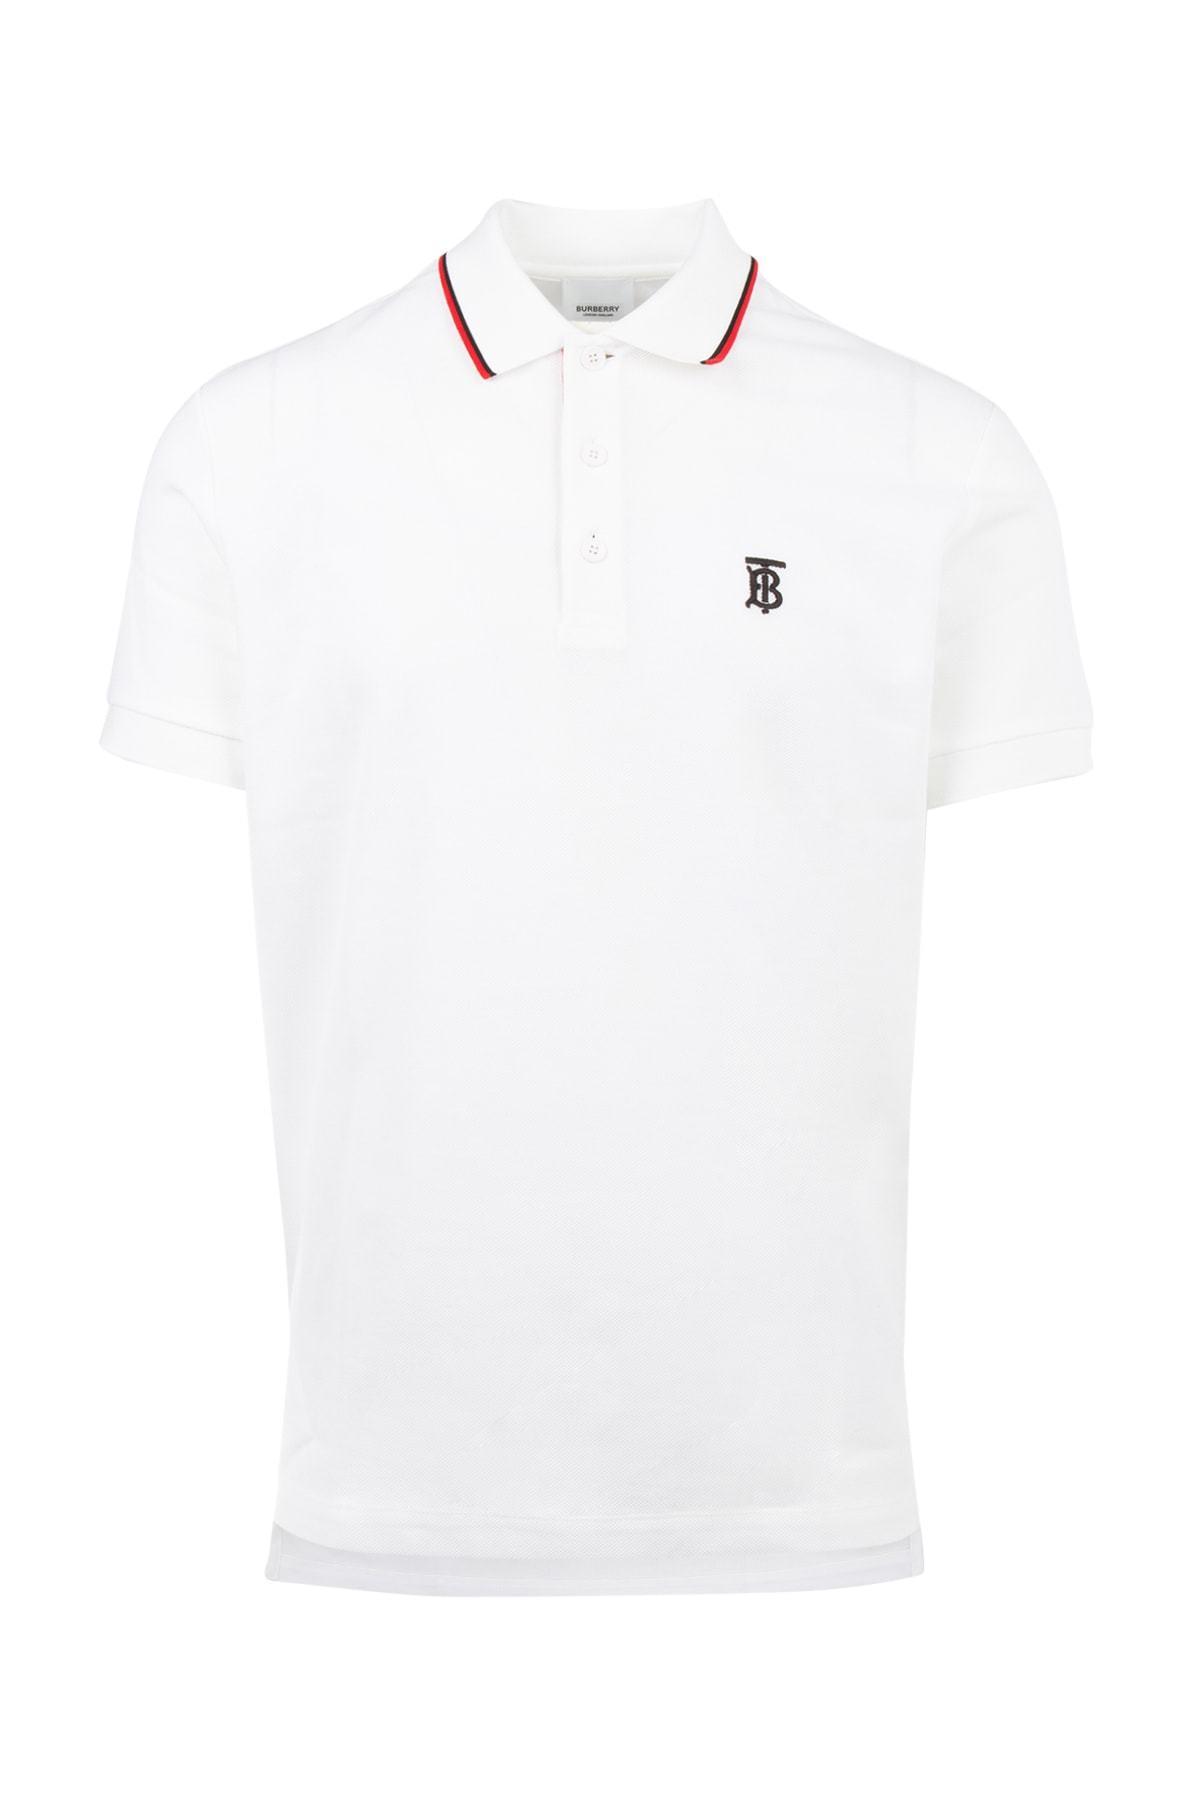 Burberry Cotton Embroidered Logo Polo Shirt in White for Men - Lyst